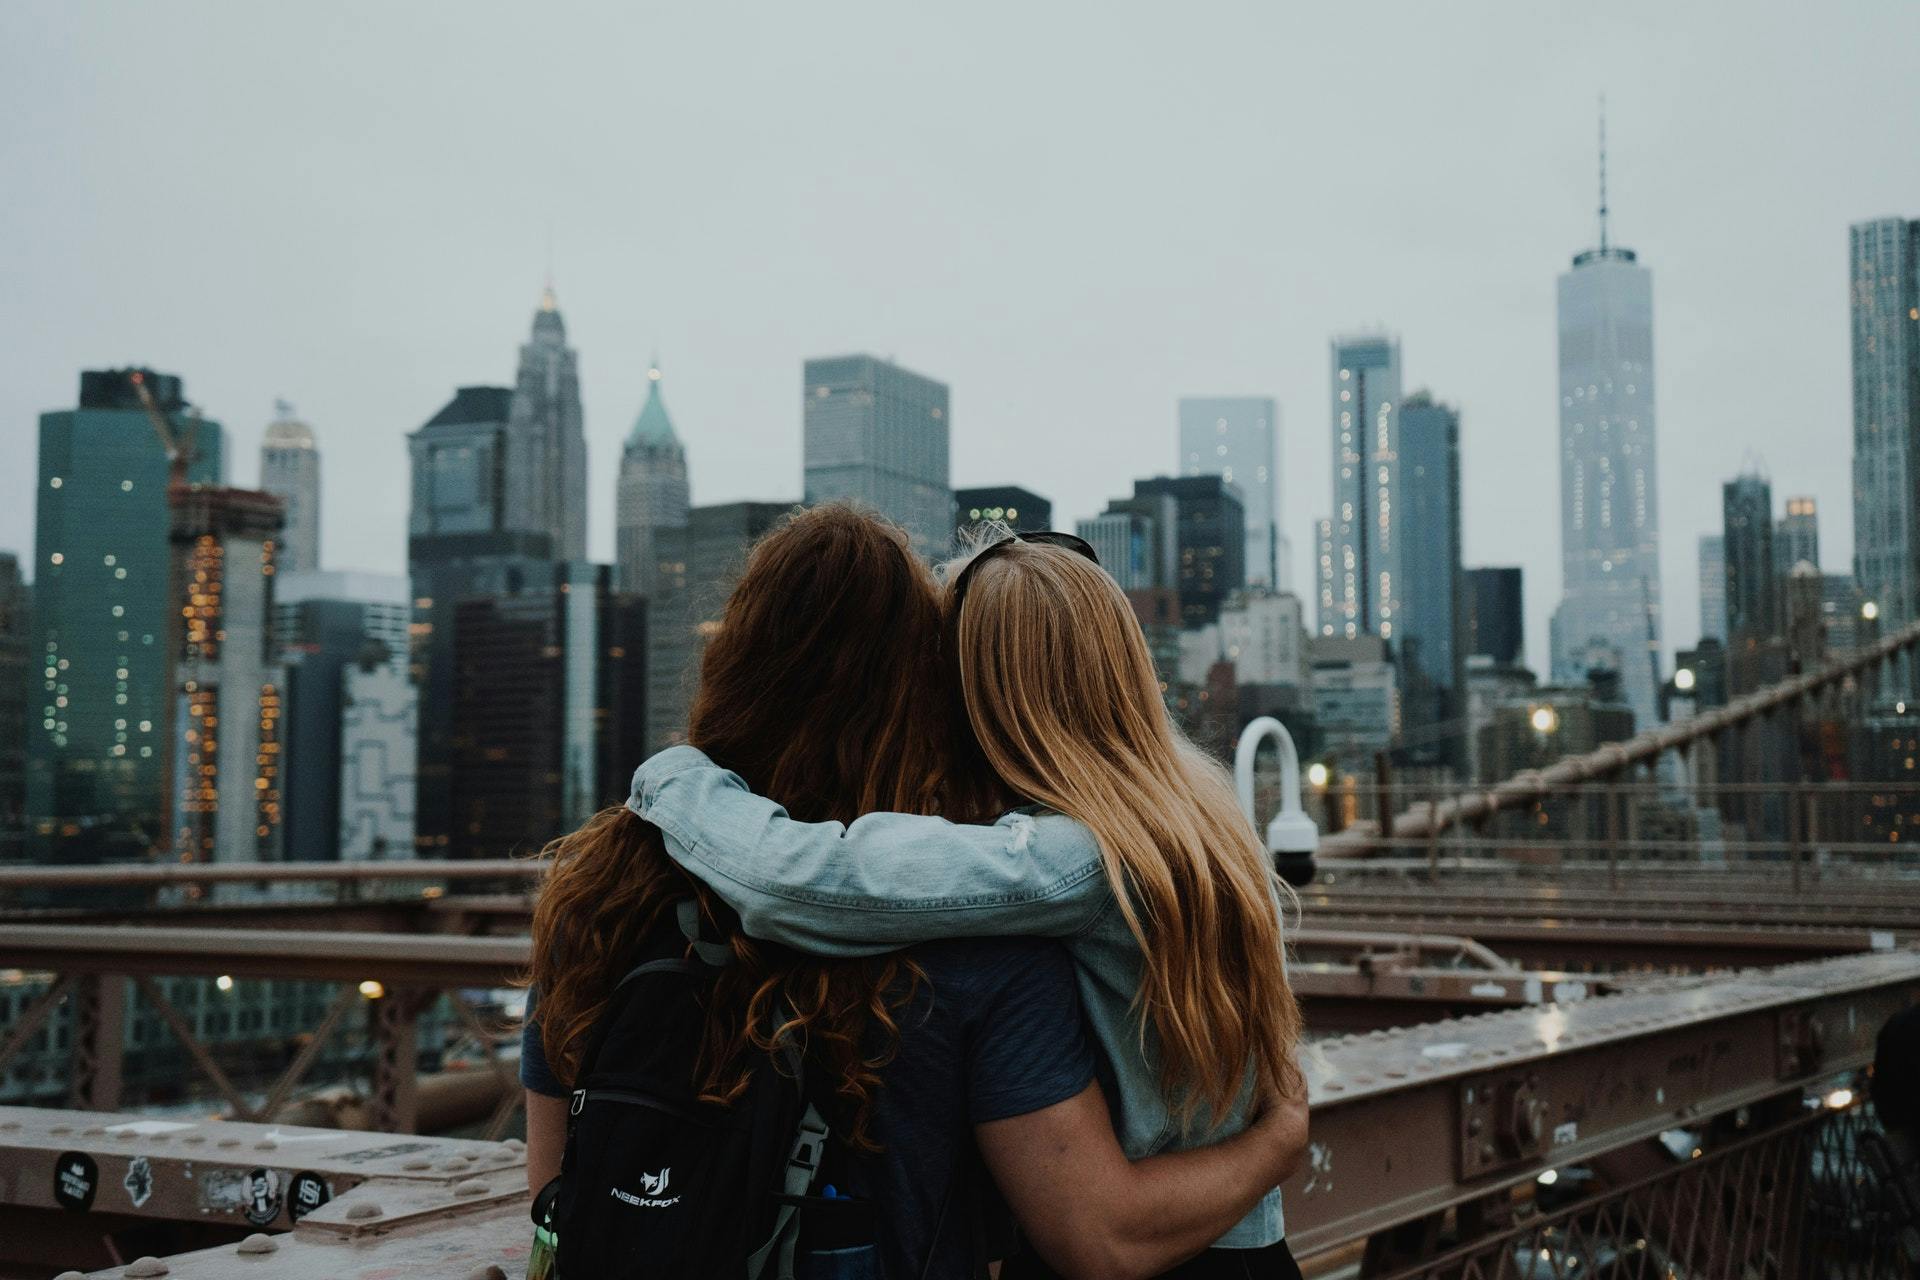 Two women embracing, looking at New York City skyscrapers